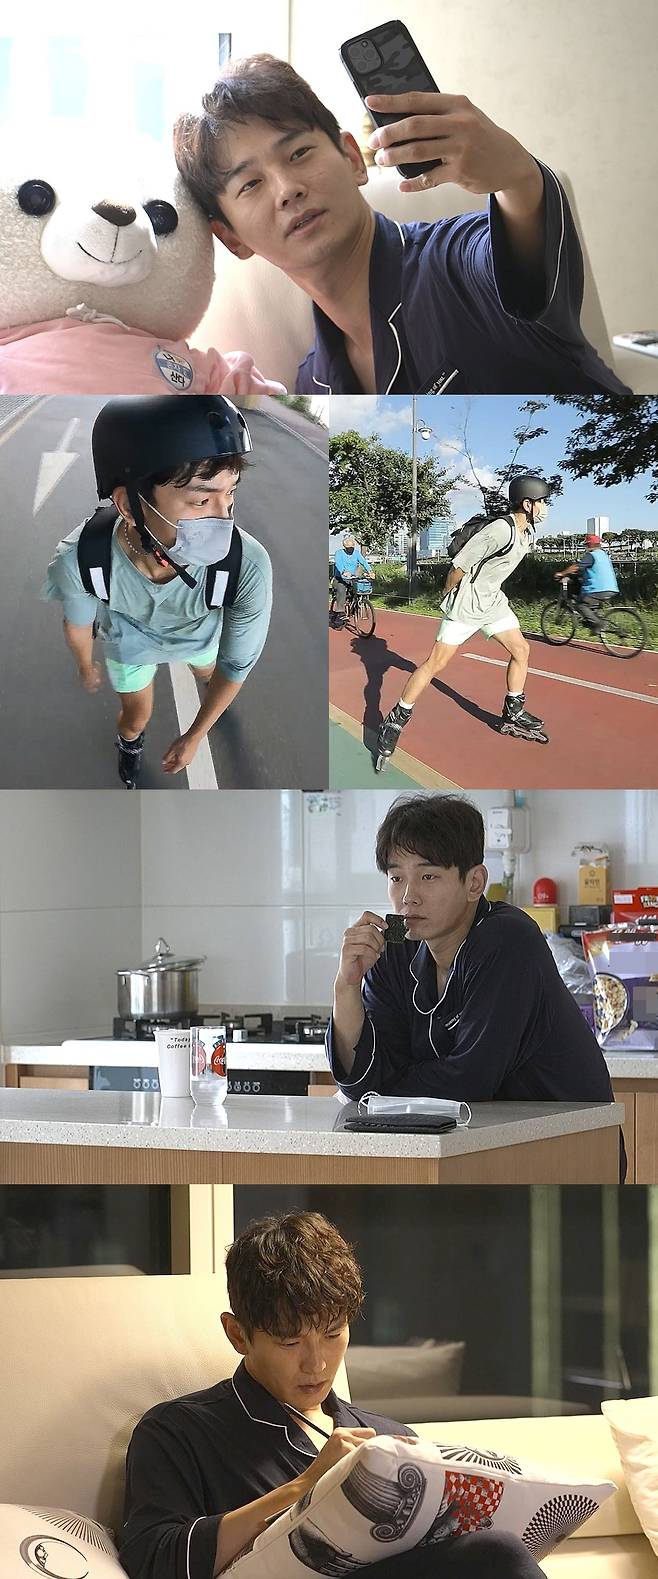 Actor On Joo-wan will make his first appearance on I Live Alone.MBCs I Live Alone (director Huh Hang Kim Ji-woo), which will be broadcast on September 24, will reveal the daily life of On Joo-wan, a reversal story of On Joo-wan.On Joo-wan, who spent half his life in The Trace this year, 19 years of The Trace, robs his gaze from his wake-up appearance to his unimaginable appearance.It will give a big smile to the inspirational daily life that is in the morning with bamboo pillows and chiropractors that can be seen in my grandfathers house.On Joo-wan enjoys memories of Snack and Morning Coffee and spends brunch time adding old sensibility.While attracting attention with the urban atmosphere and the contrary taste, he takes out his best Snack and says, I do not know you these days. He smiles with a embarrassed smile, raising questions about what Snack he enjoys.On Joo-wan then had a skin massage (?) reminiscent of Matazak.) and I will give a smile to the burst of bread with the inspirational moment, such as sticking to cash in my wallet alone in the e-money era.On Joo-wans warmness sensibility is the back door that shines in hobby.On Joo-wan is going to give viewers memories that seem to have returned to the 2000s as a hobby of those days full of millennial sensibility.On Joo-wan, who rides inline skating alone through the kickboard and bicycle, was captured and surprised.On Joo-wan, who has been in the inline skating for four years, is expected to raise his expectations by showing his advanced step technology and cornering as well as his 10-kilometer round-trip course.